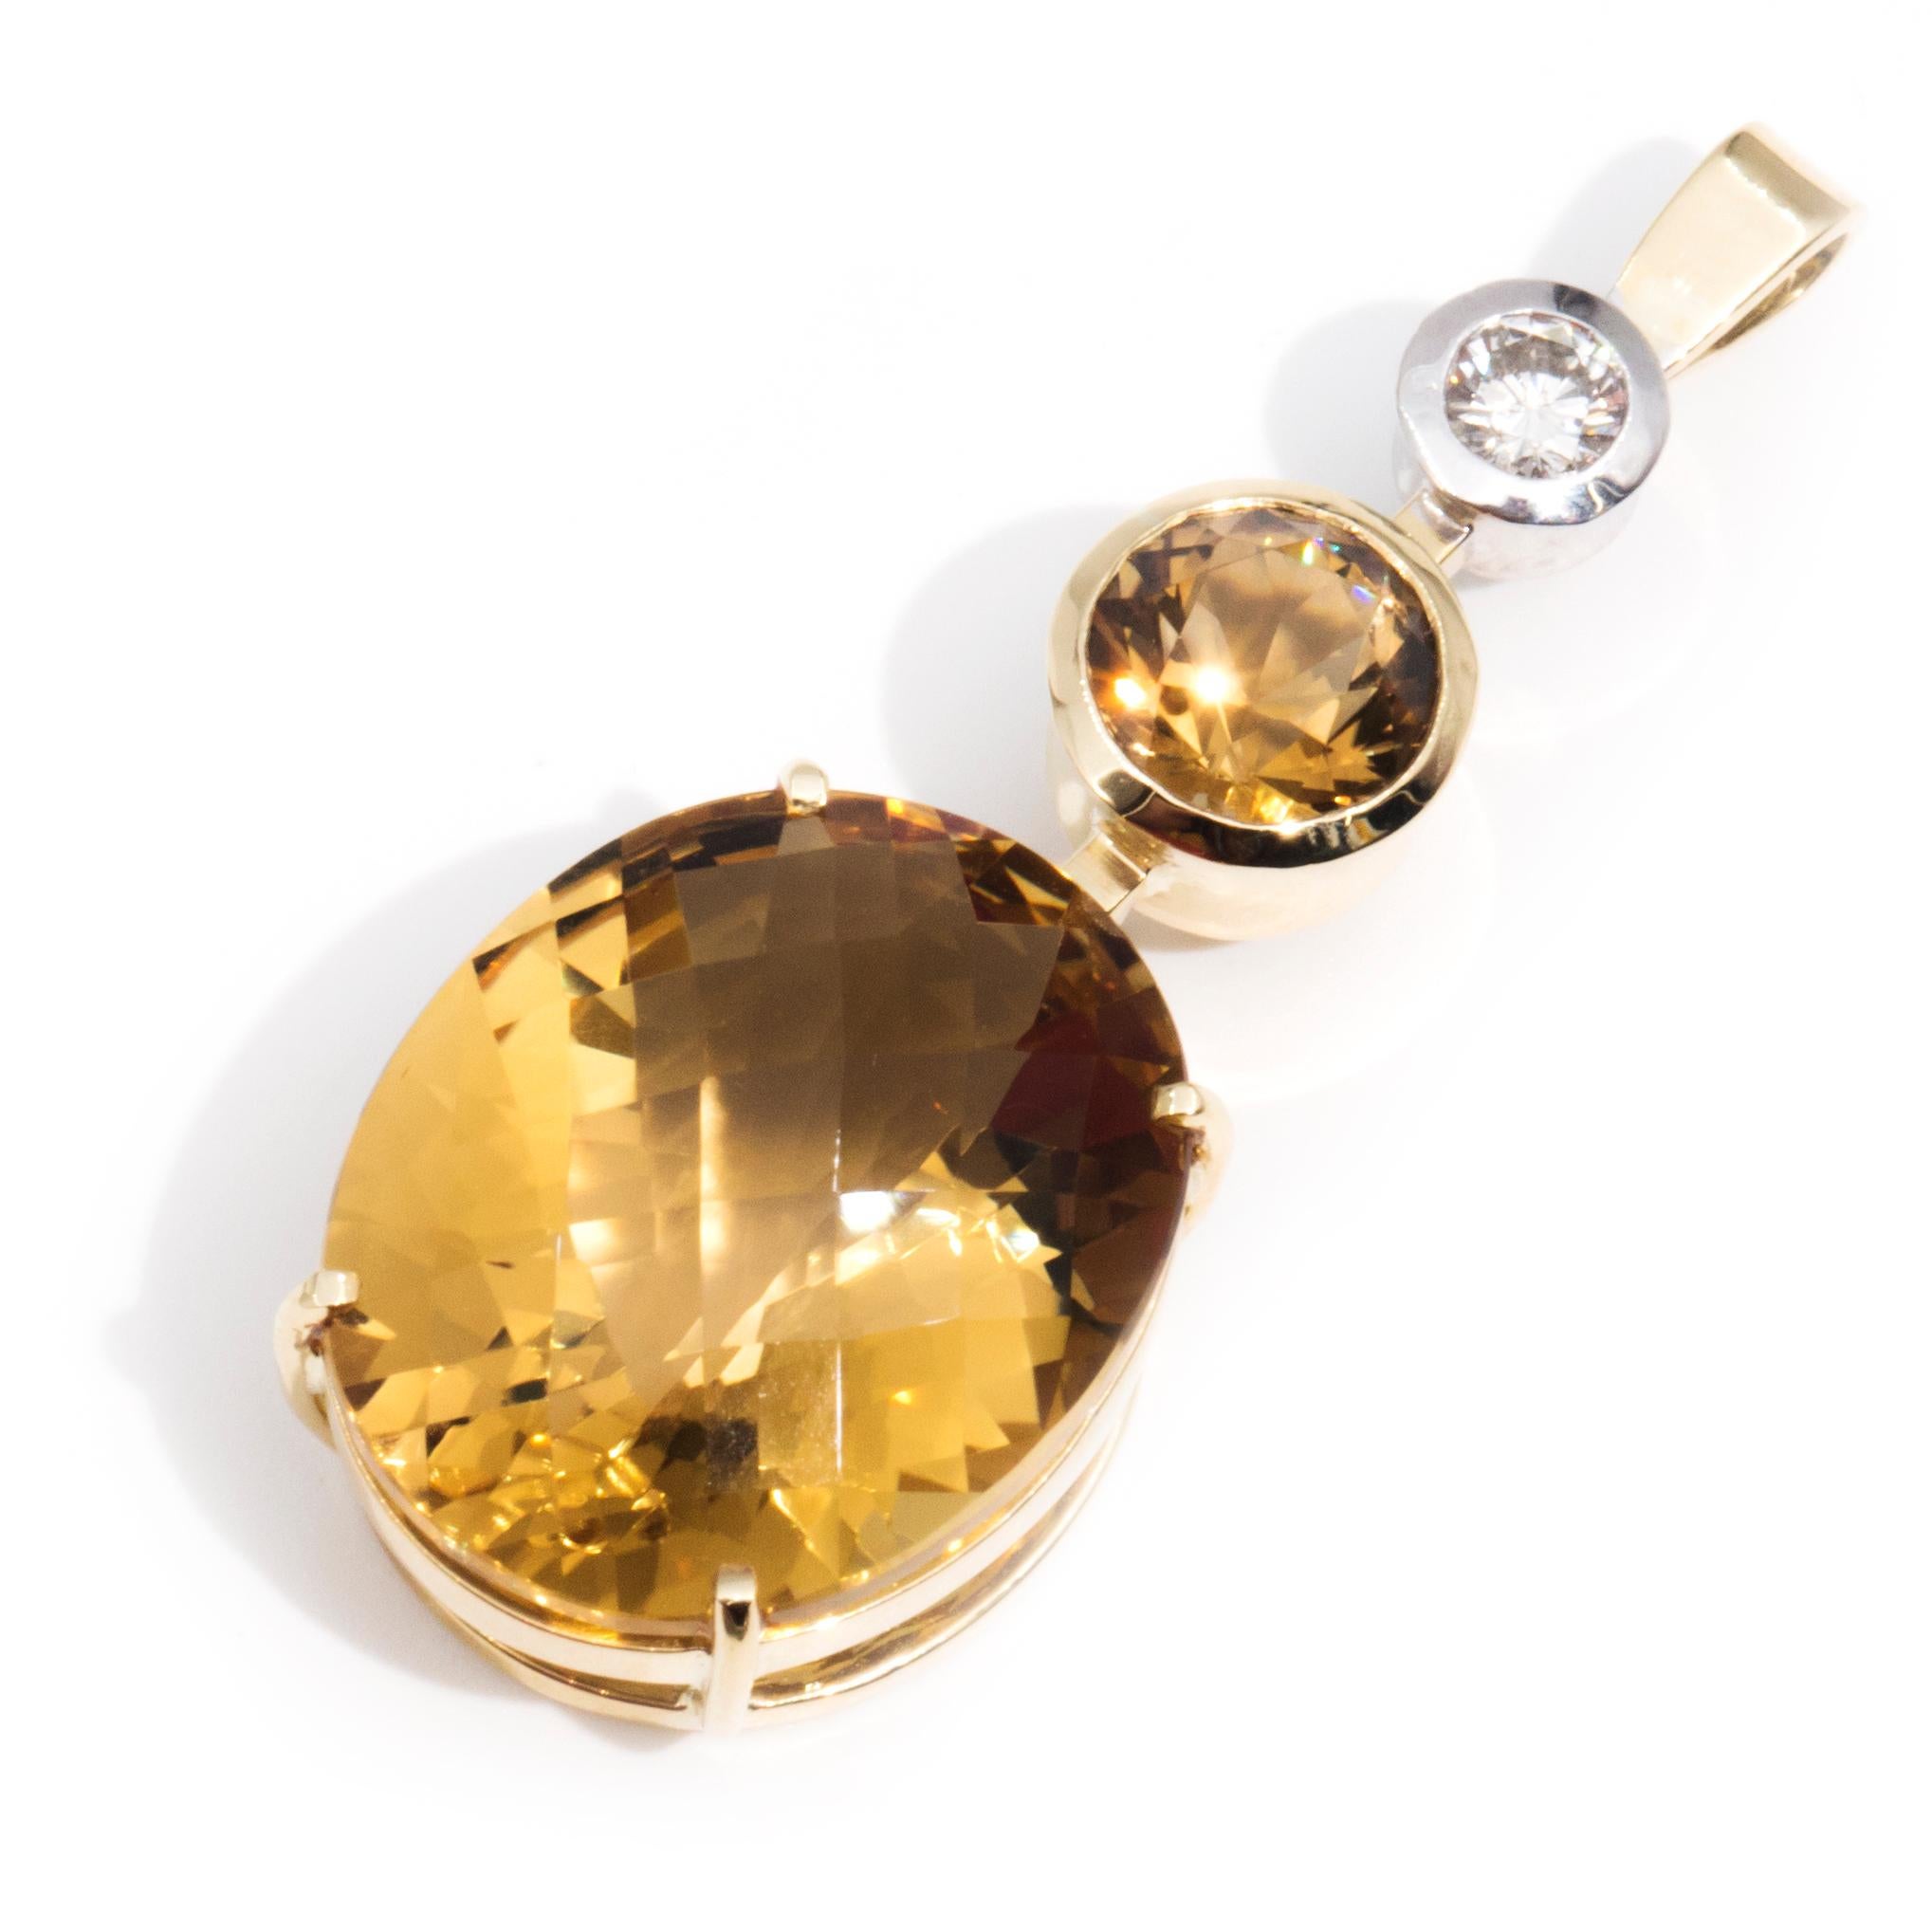 Forged in 18 carat yellow gold, this charming vintage pendant features a boastful three-tiered drop set with one 0.30 carat rub over round brilliant diamond at the apex. Below is one round deep yellow citrine and below that is the stunning